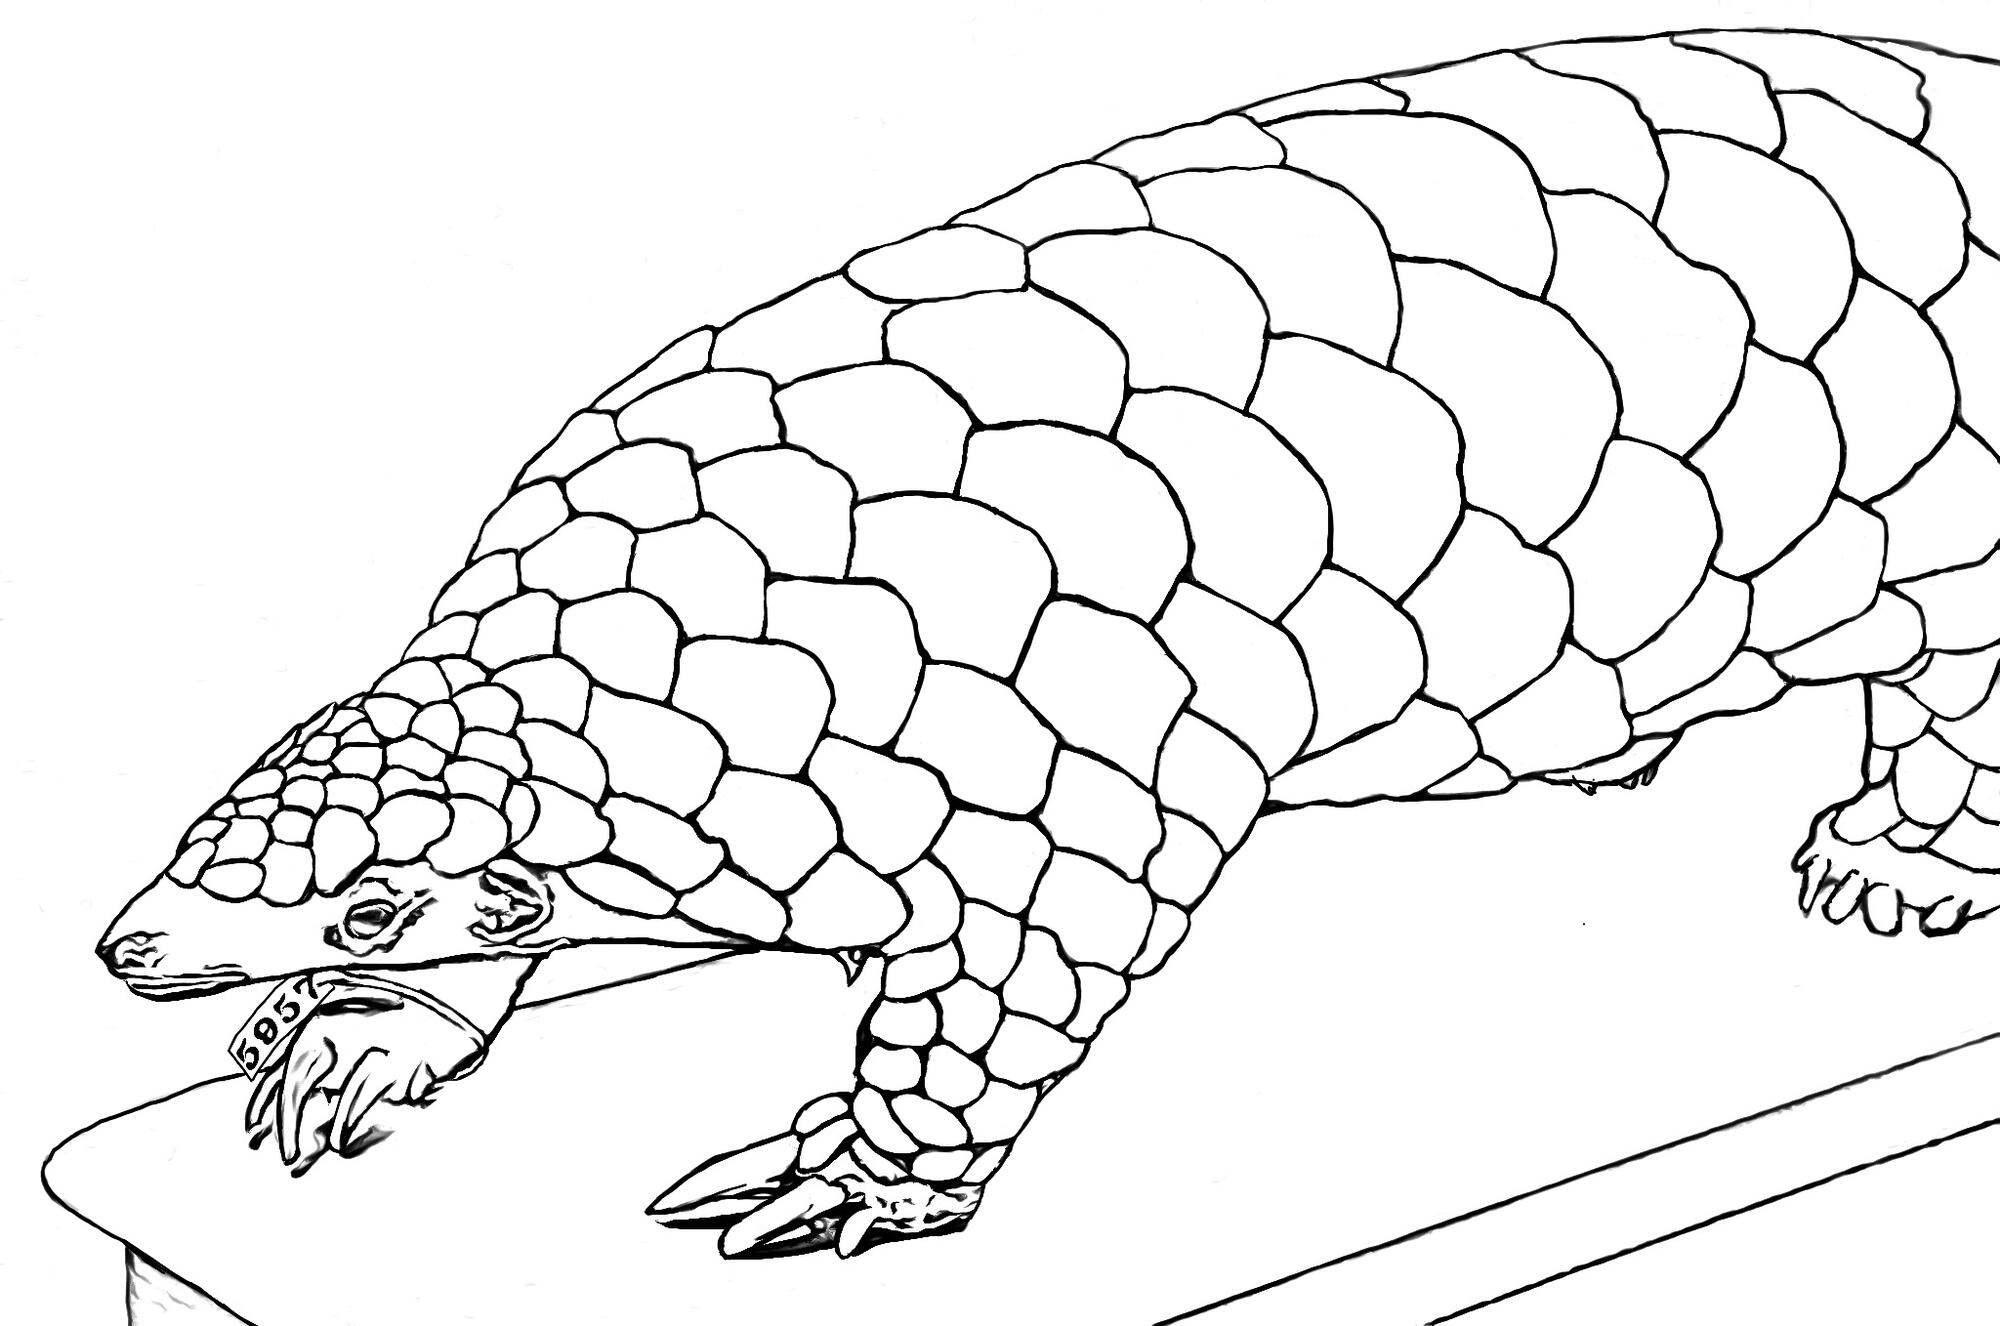 Black and white illustration of a pangolin.